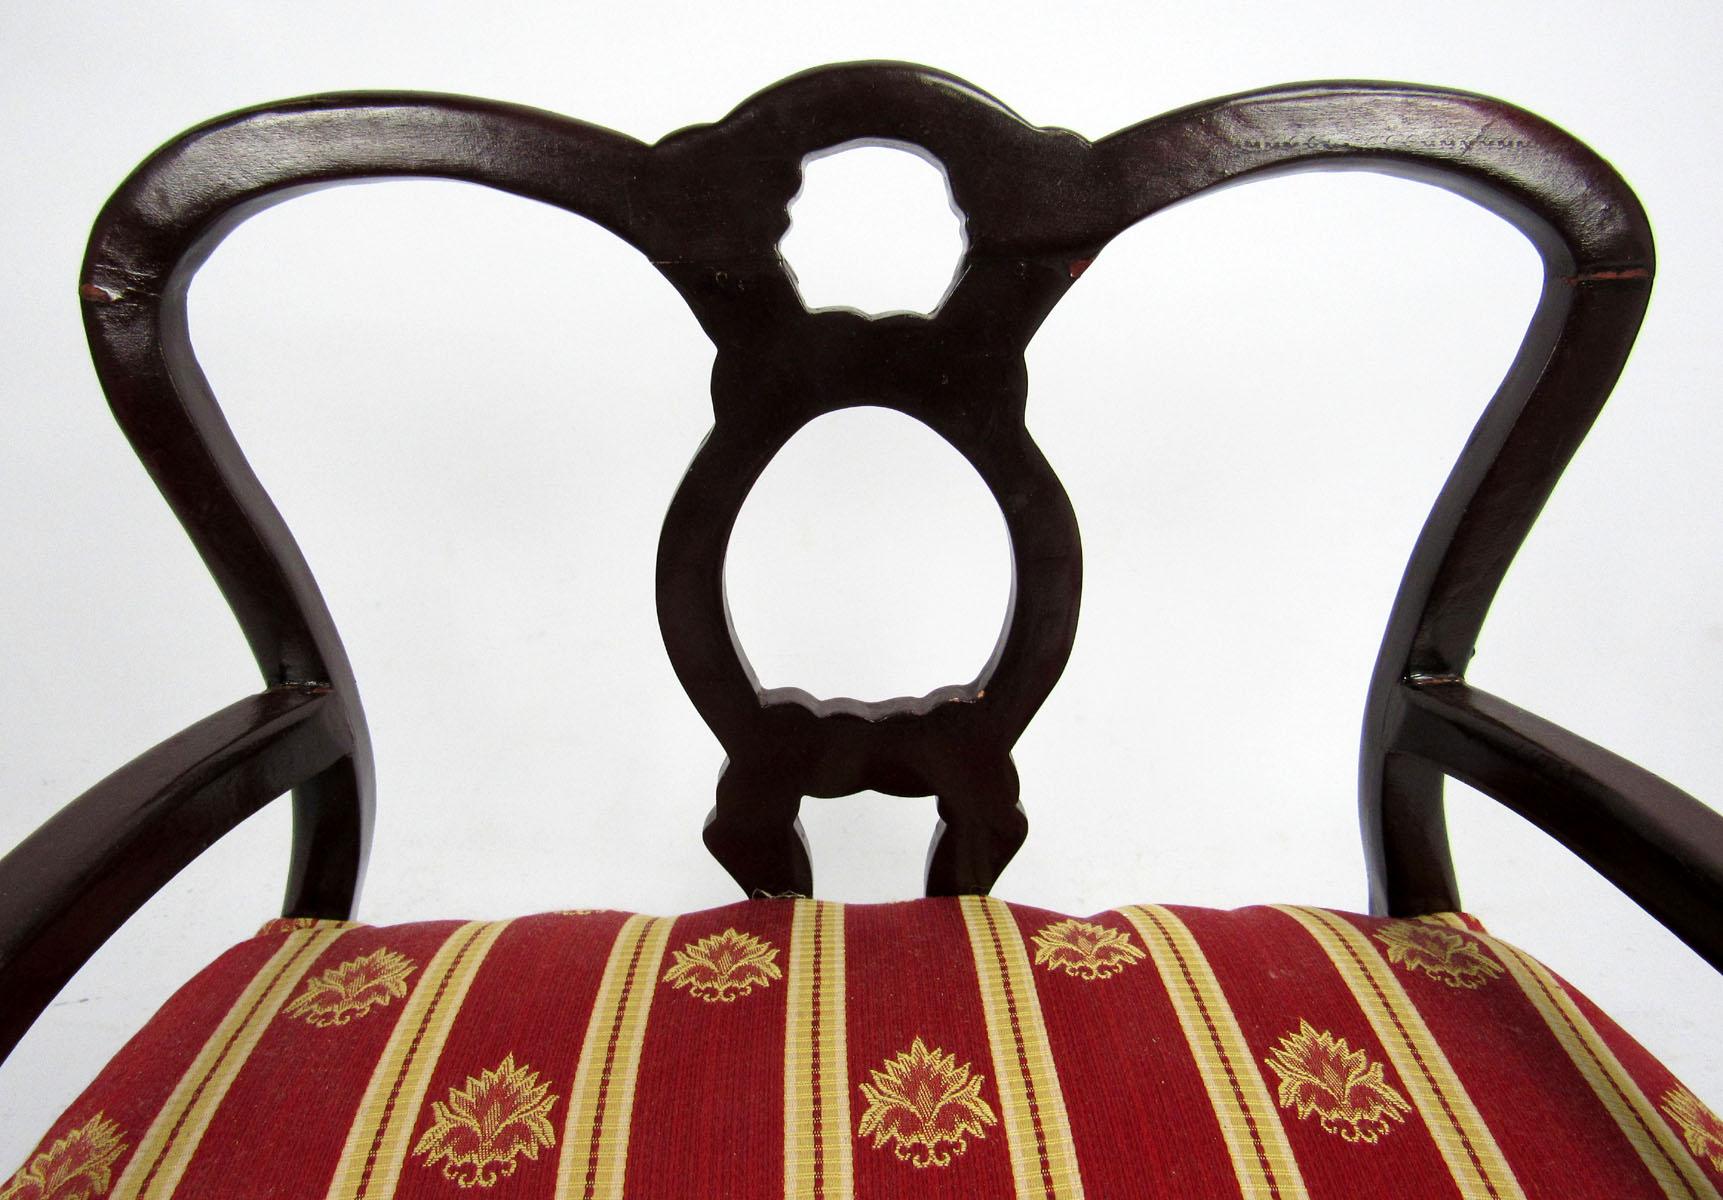 20th century French style miniature settee upholstered in red and gold striped fabric.